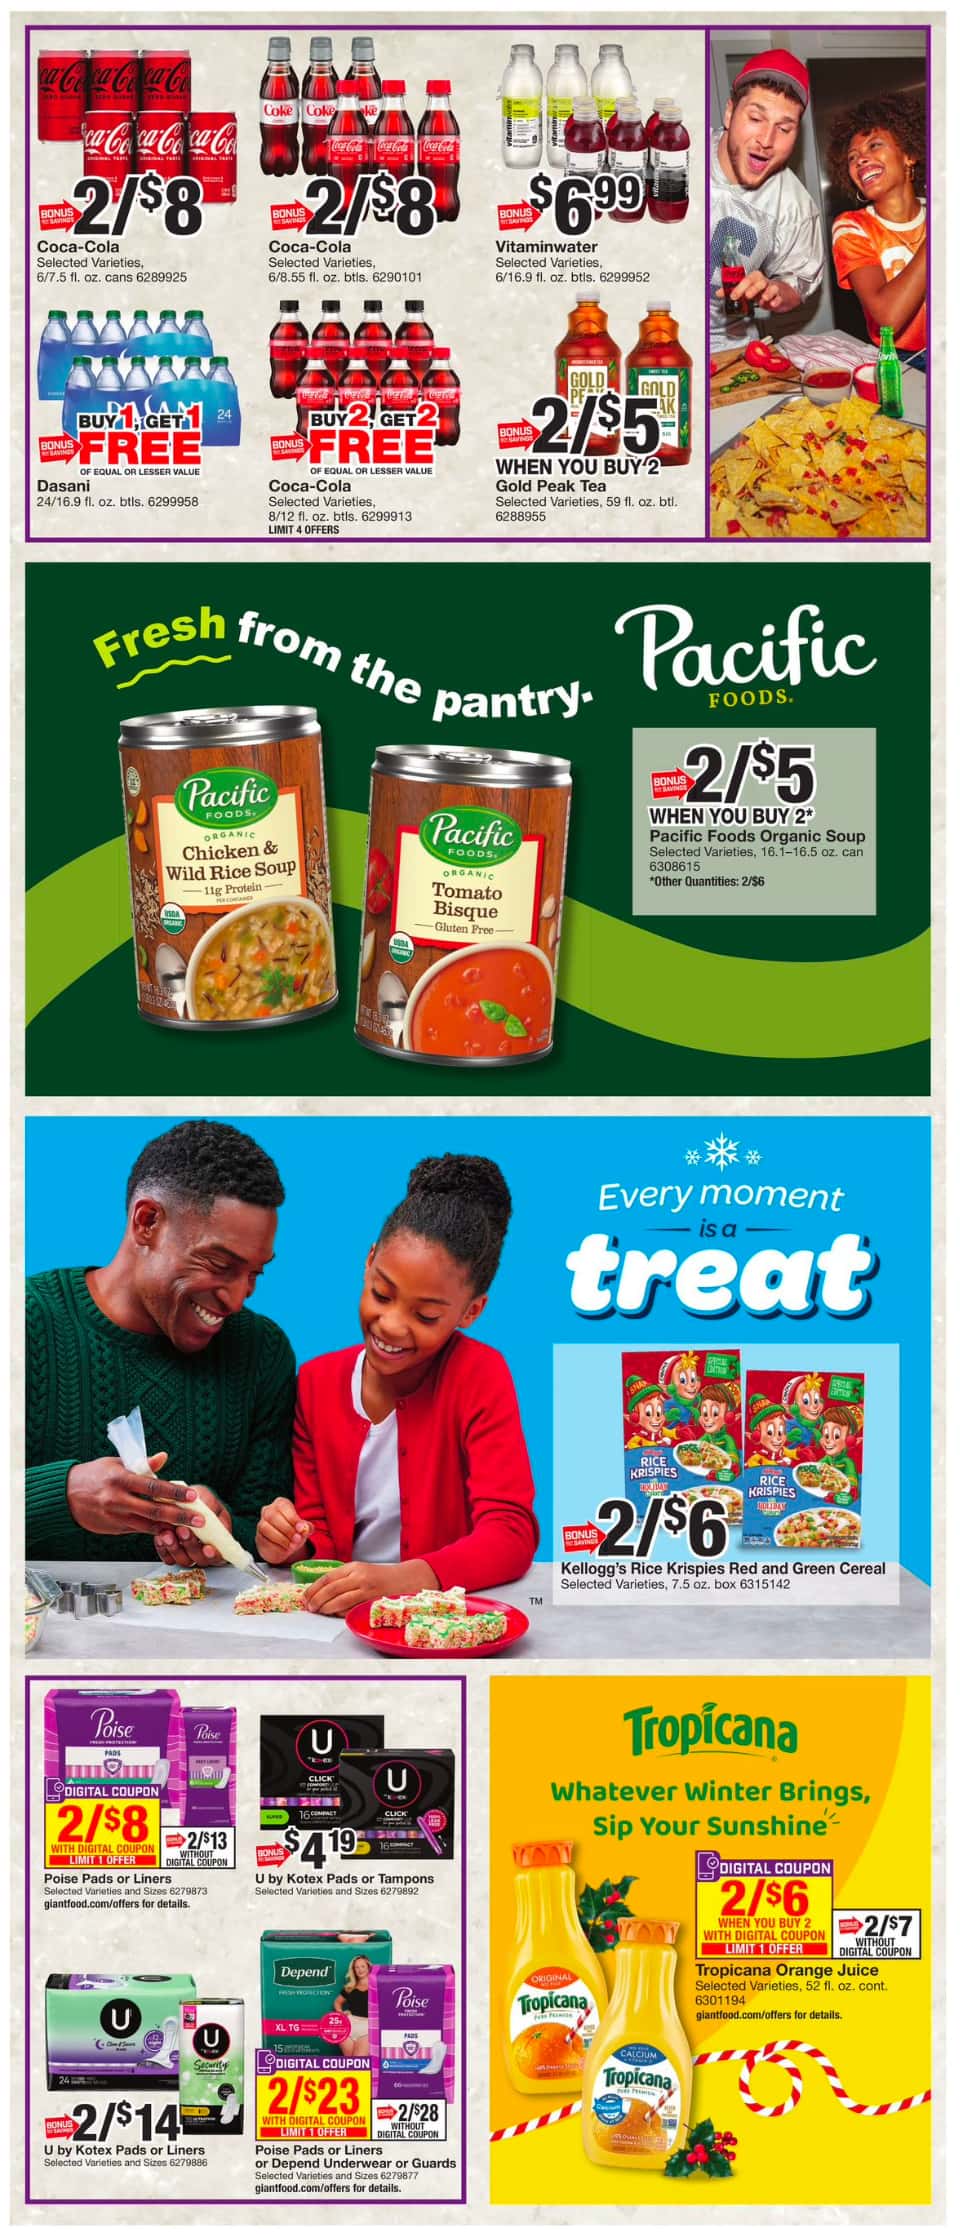 Giant Food Stores Weekly Ad December 1 - 7, 2023